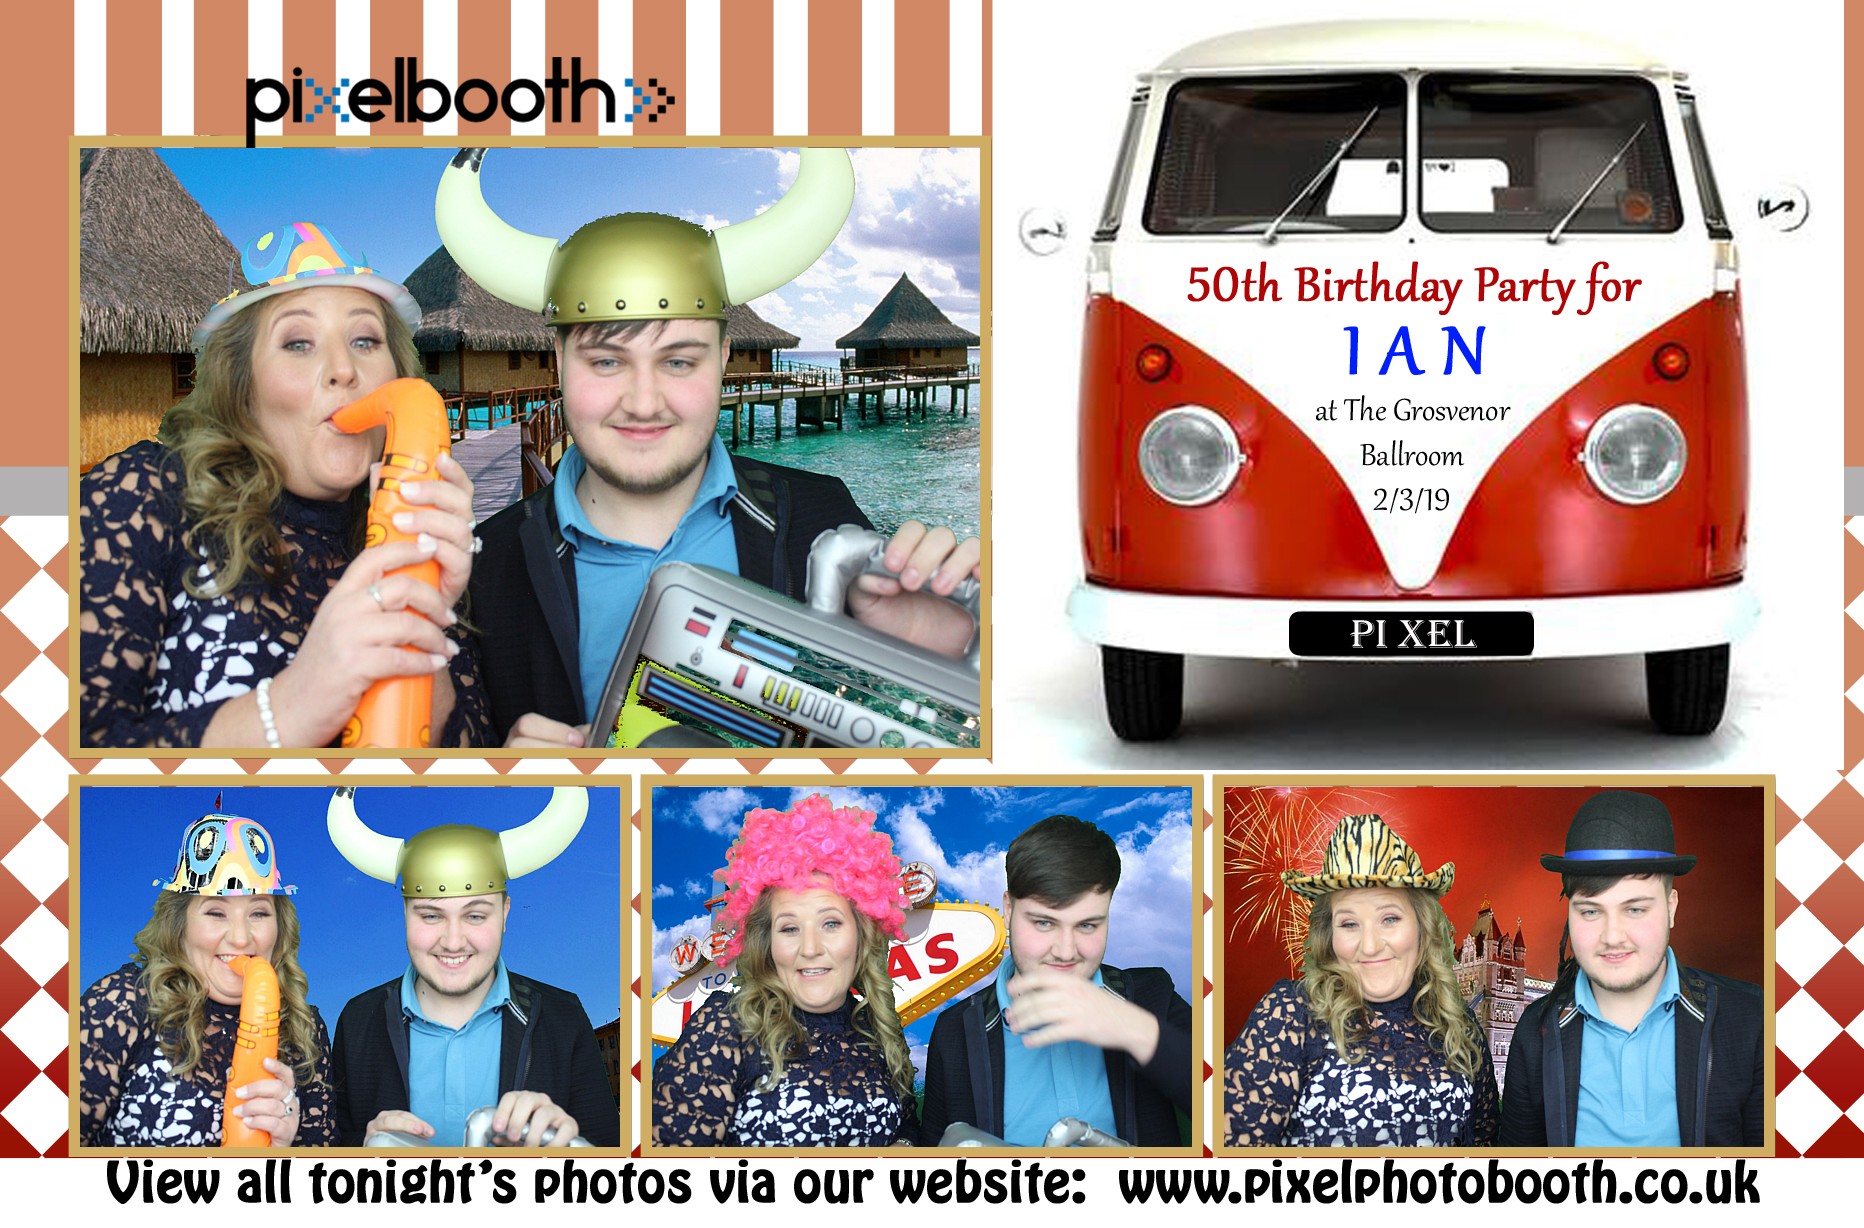 2nd March 2019: Ian's 30th at The Grosvenor Ballroom